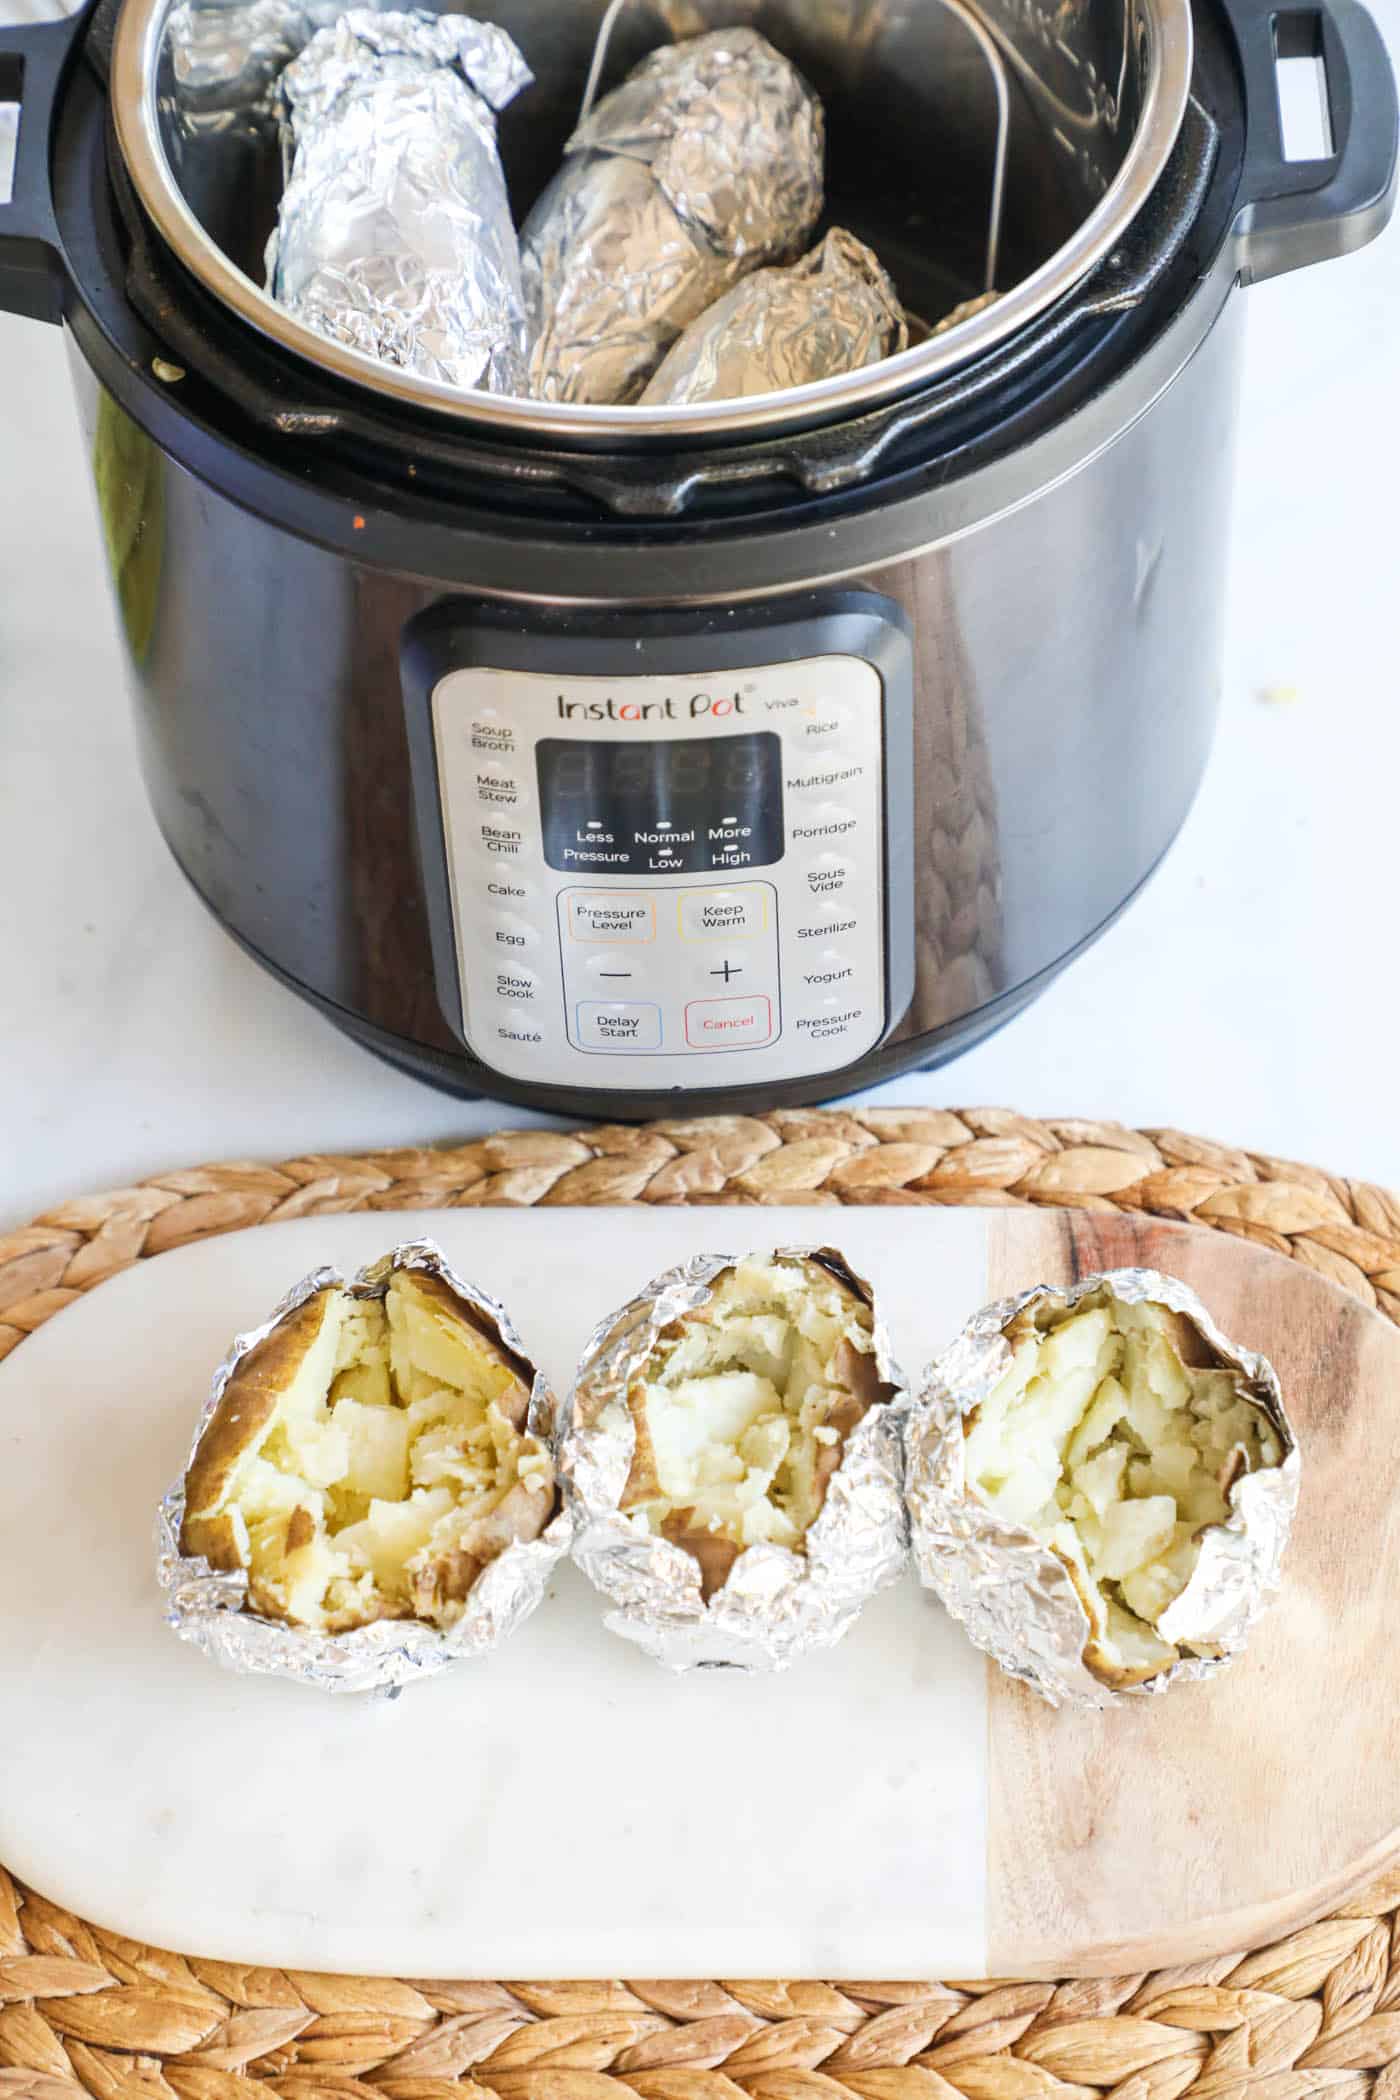 Baked potatoes next to an instant pot